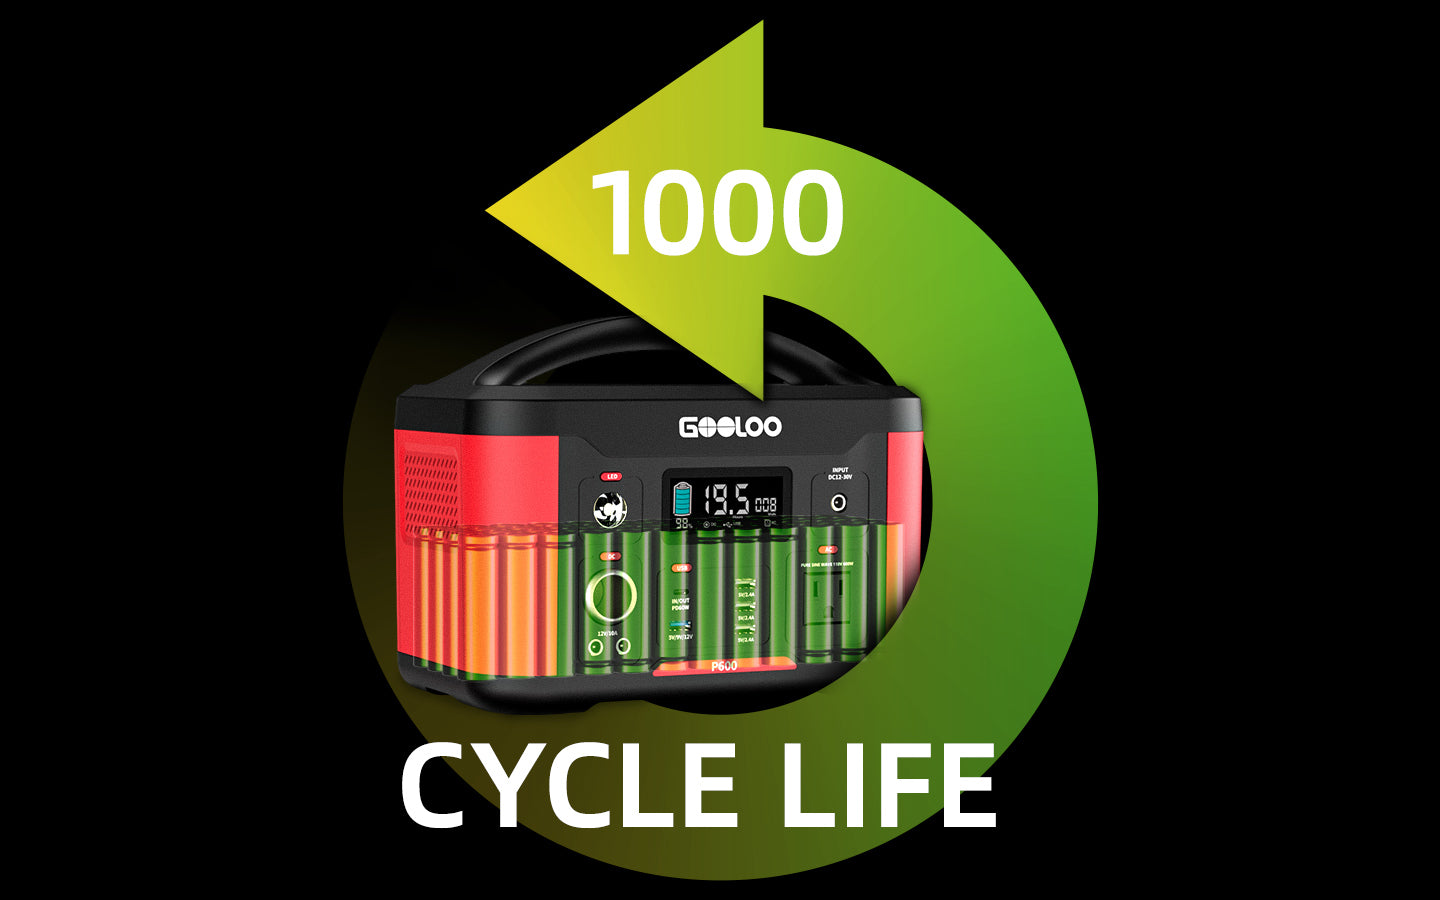 battery cycle life 1000 times 18650 batteries pack